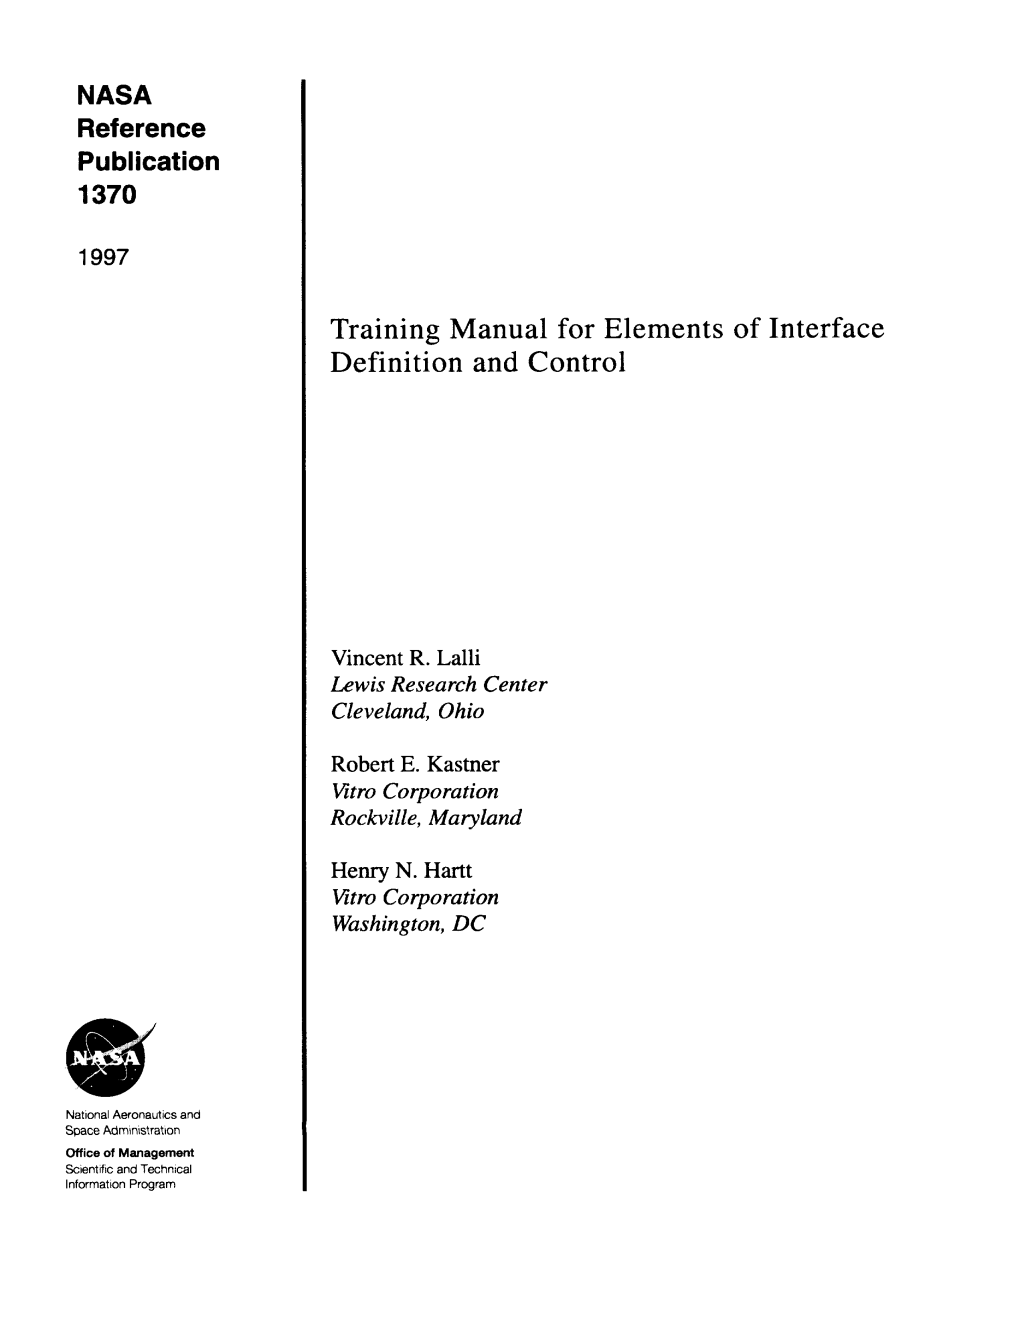 NASA Reference Publication 1370 Training Manual for Elements Of